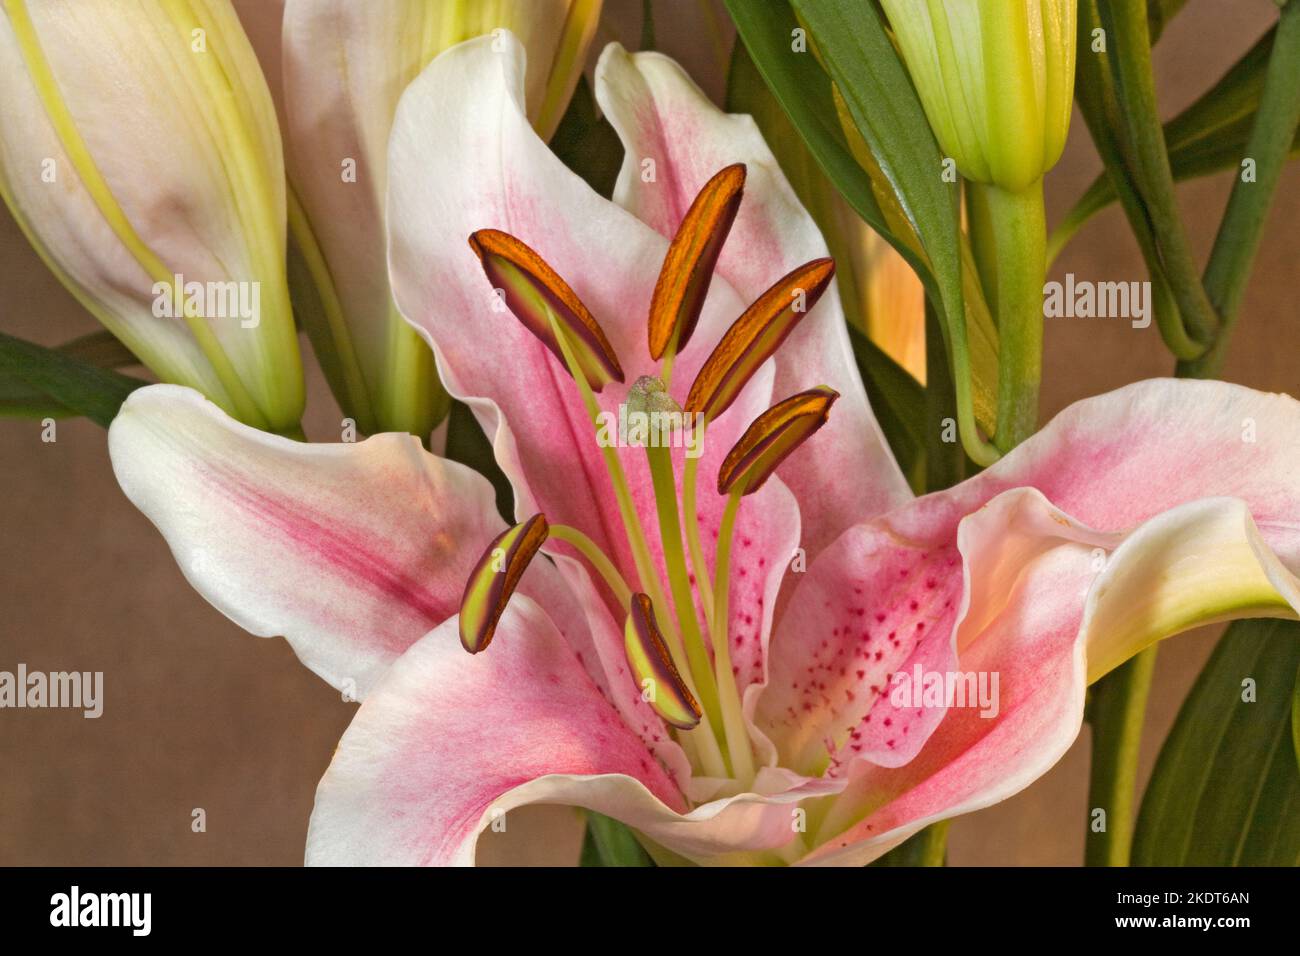 Lilium 'Stargazer', or Stargazer Lily, in a bouquet of lilies. Stock Photo